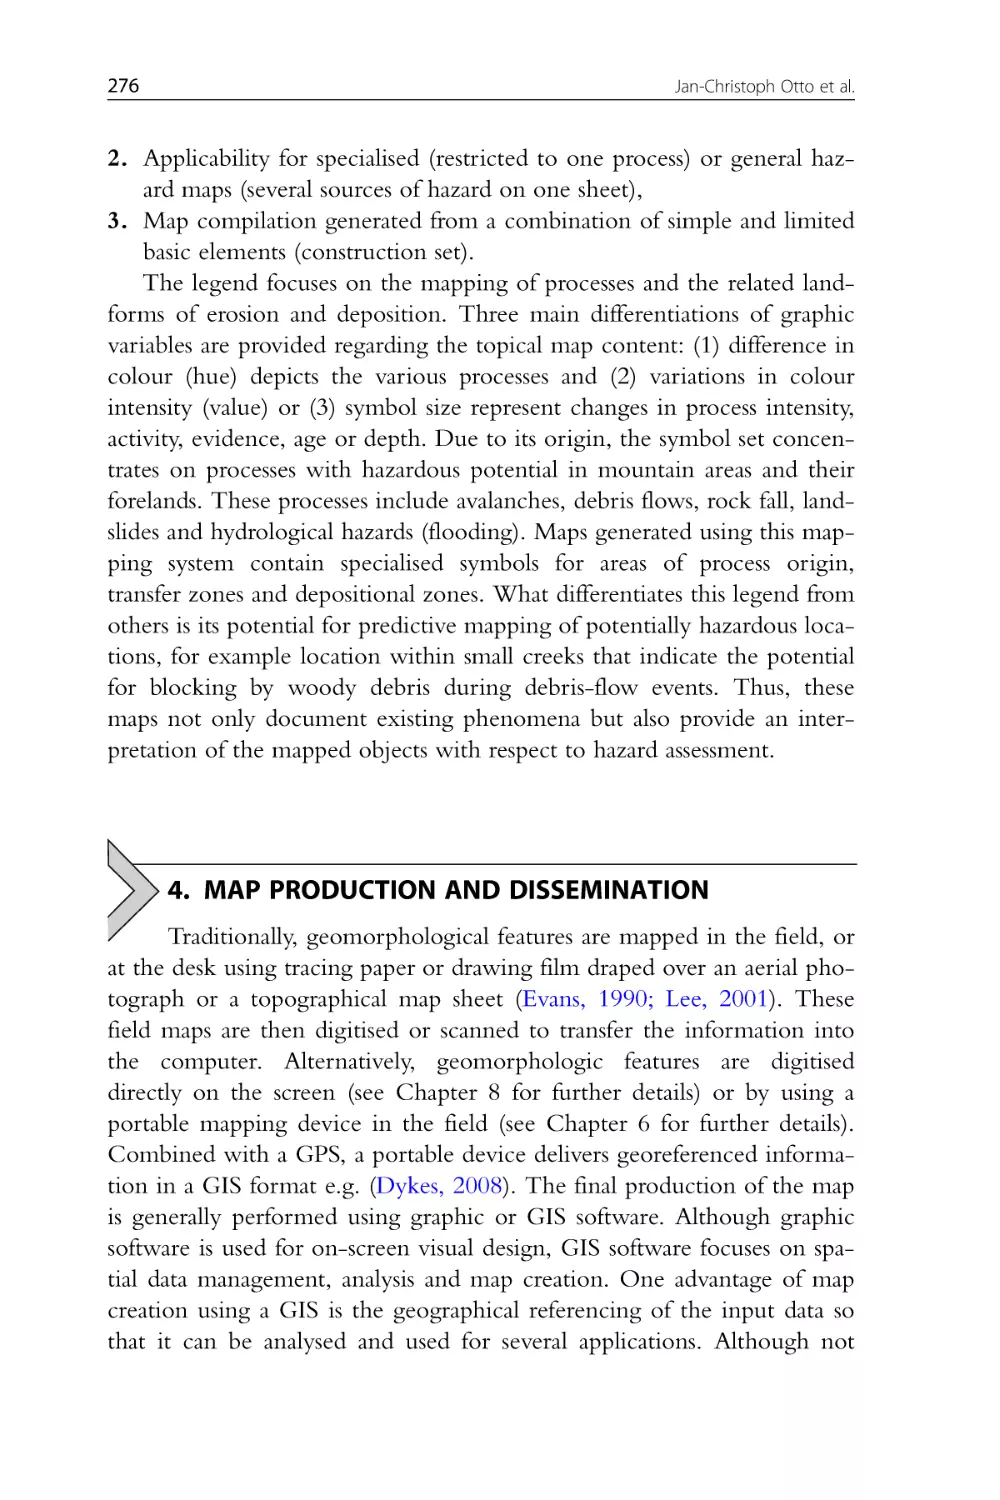 4. Map Production and Dissemination